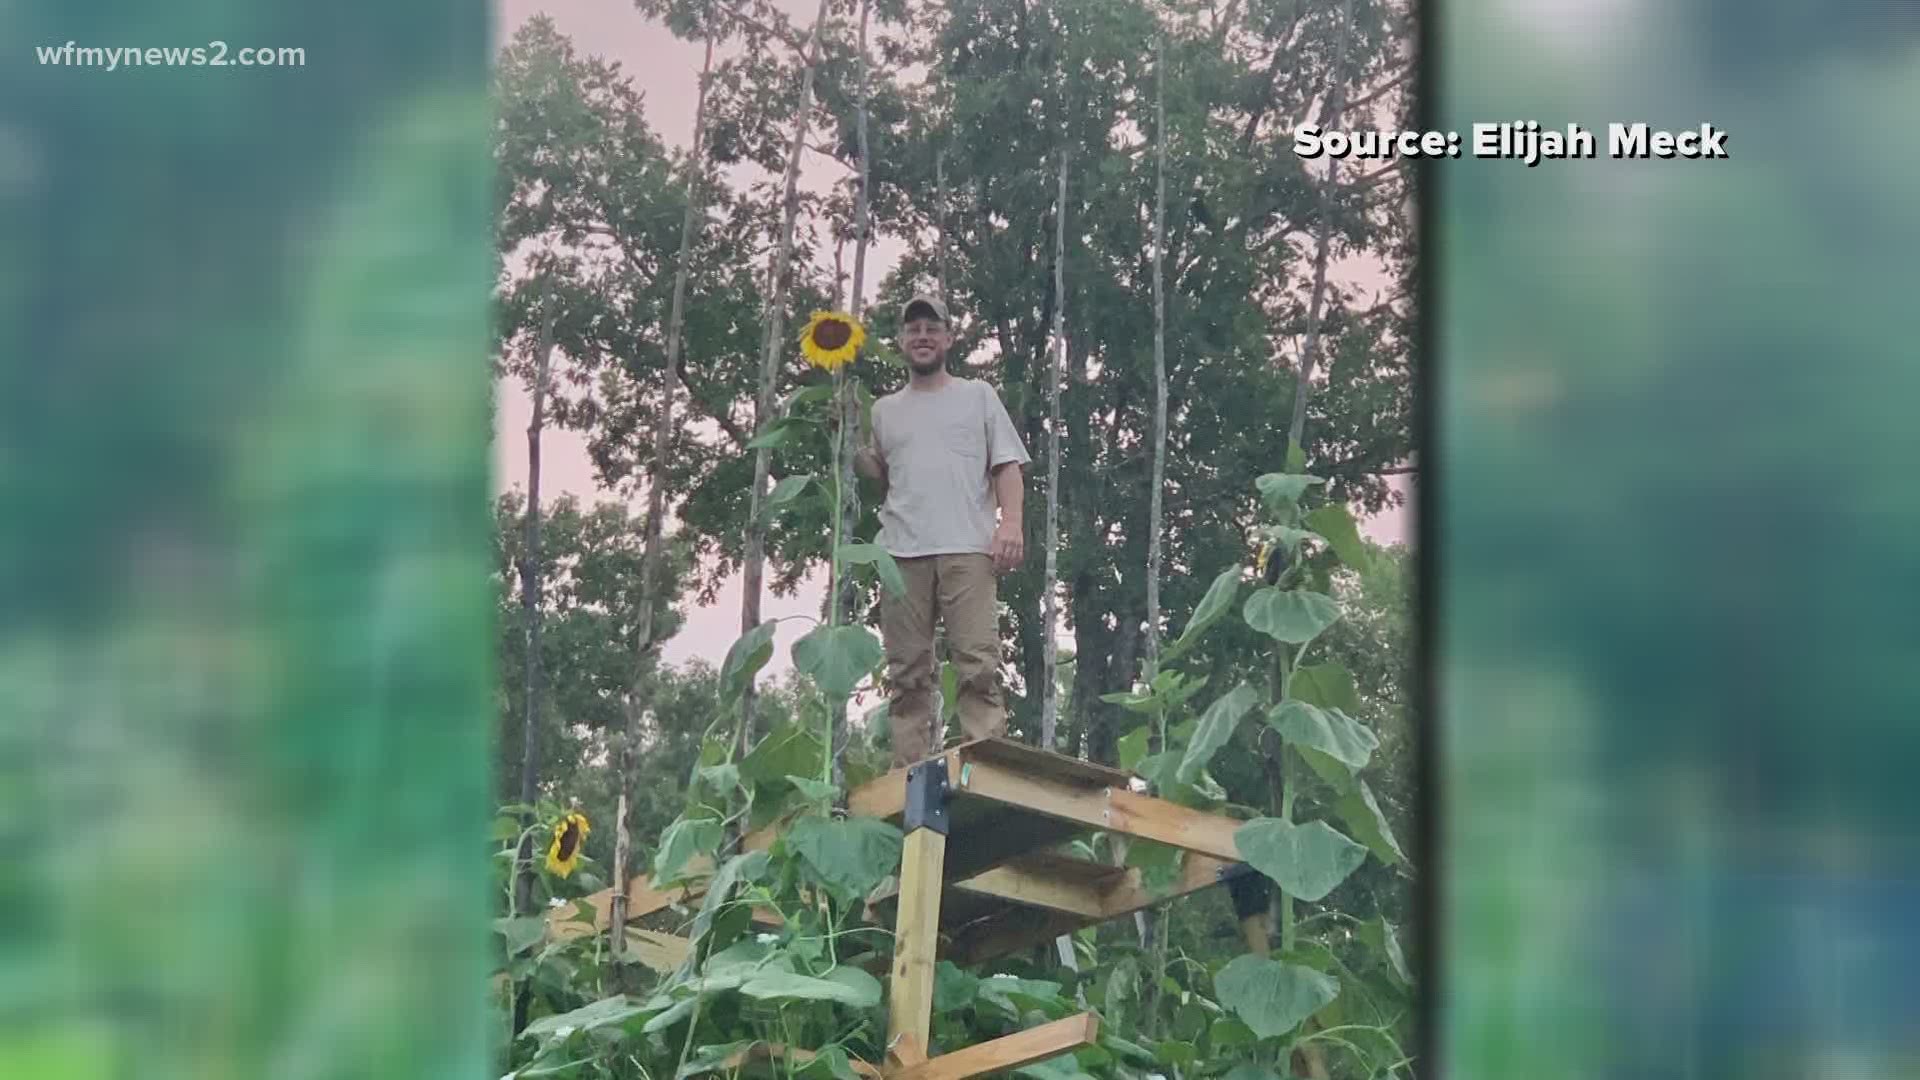 Elijah Meck started growing flowers as a hobby. Now, his hobby has turned him into the owner of North Carolina’s tallest sunflower.